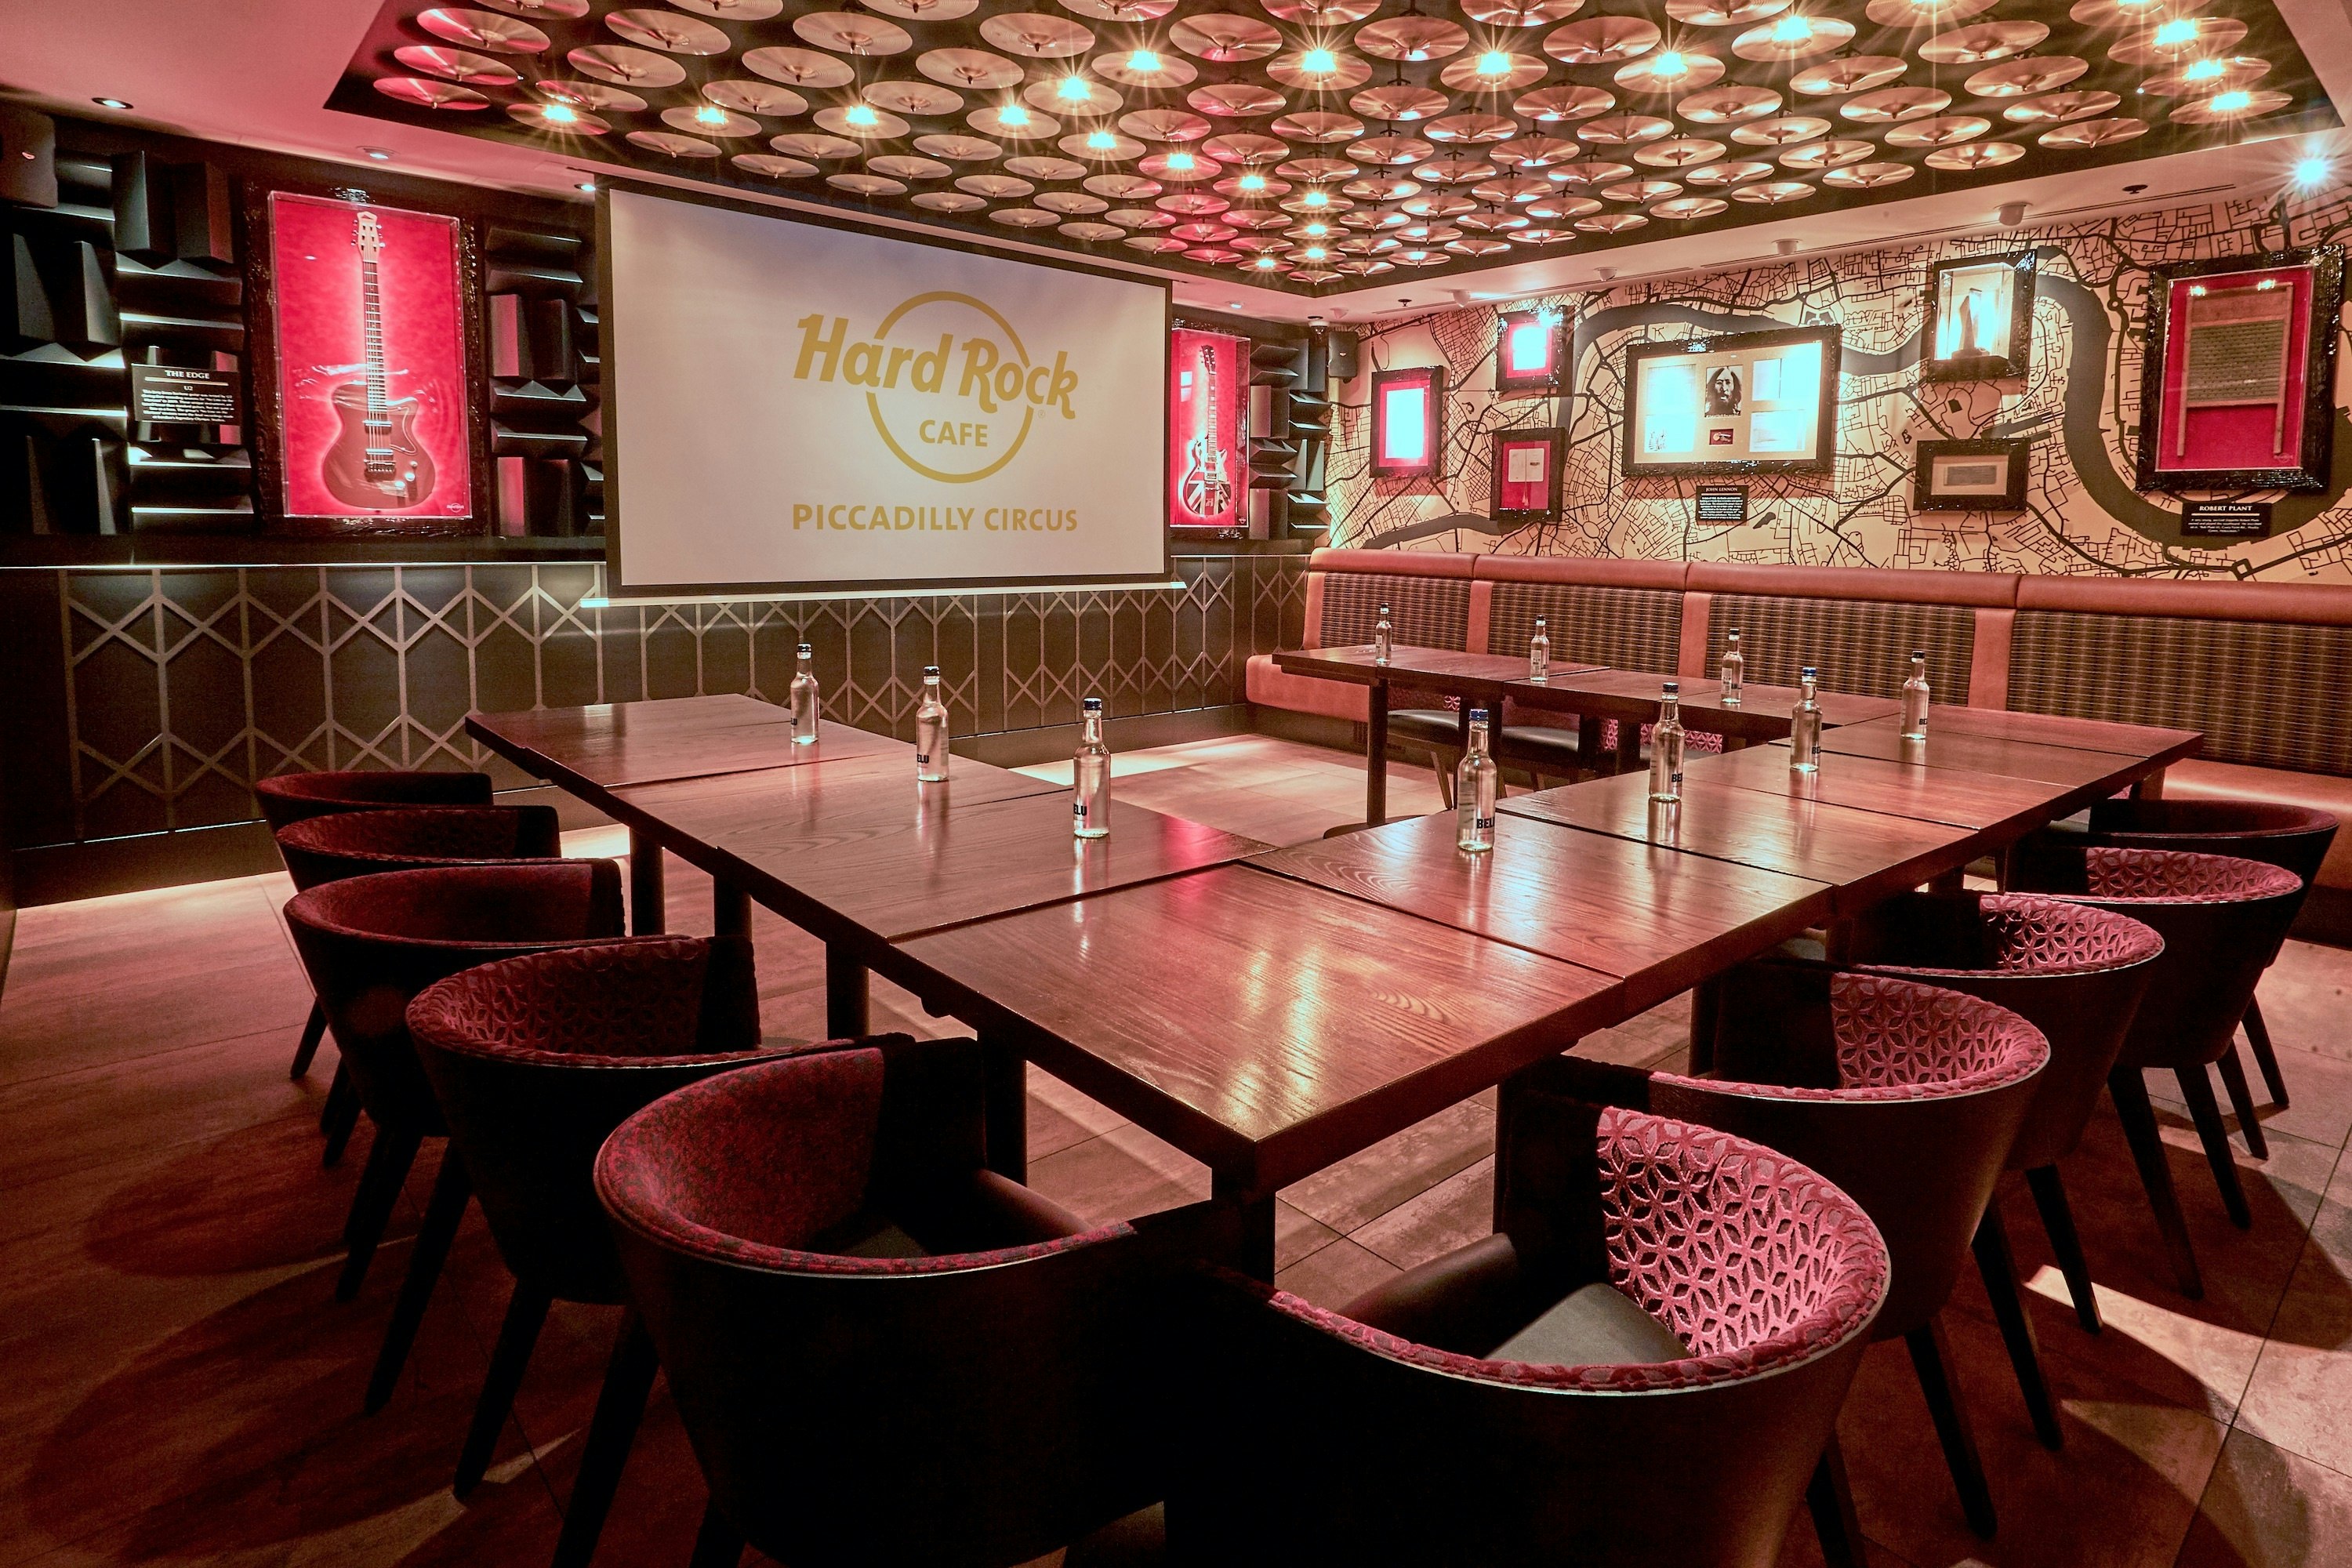 Hard Rock Cafe Piccadilly Circus - Legends Room image 6